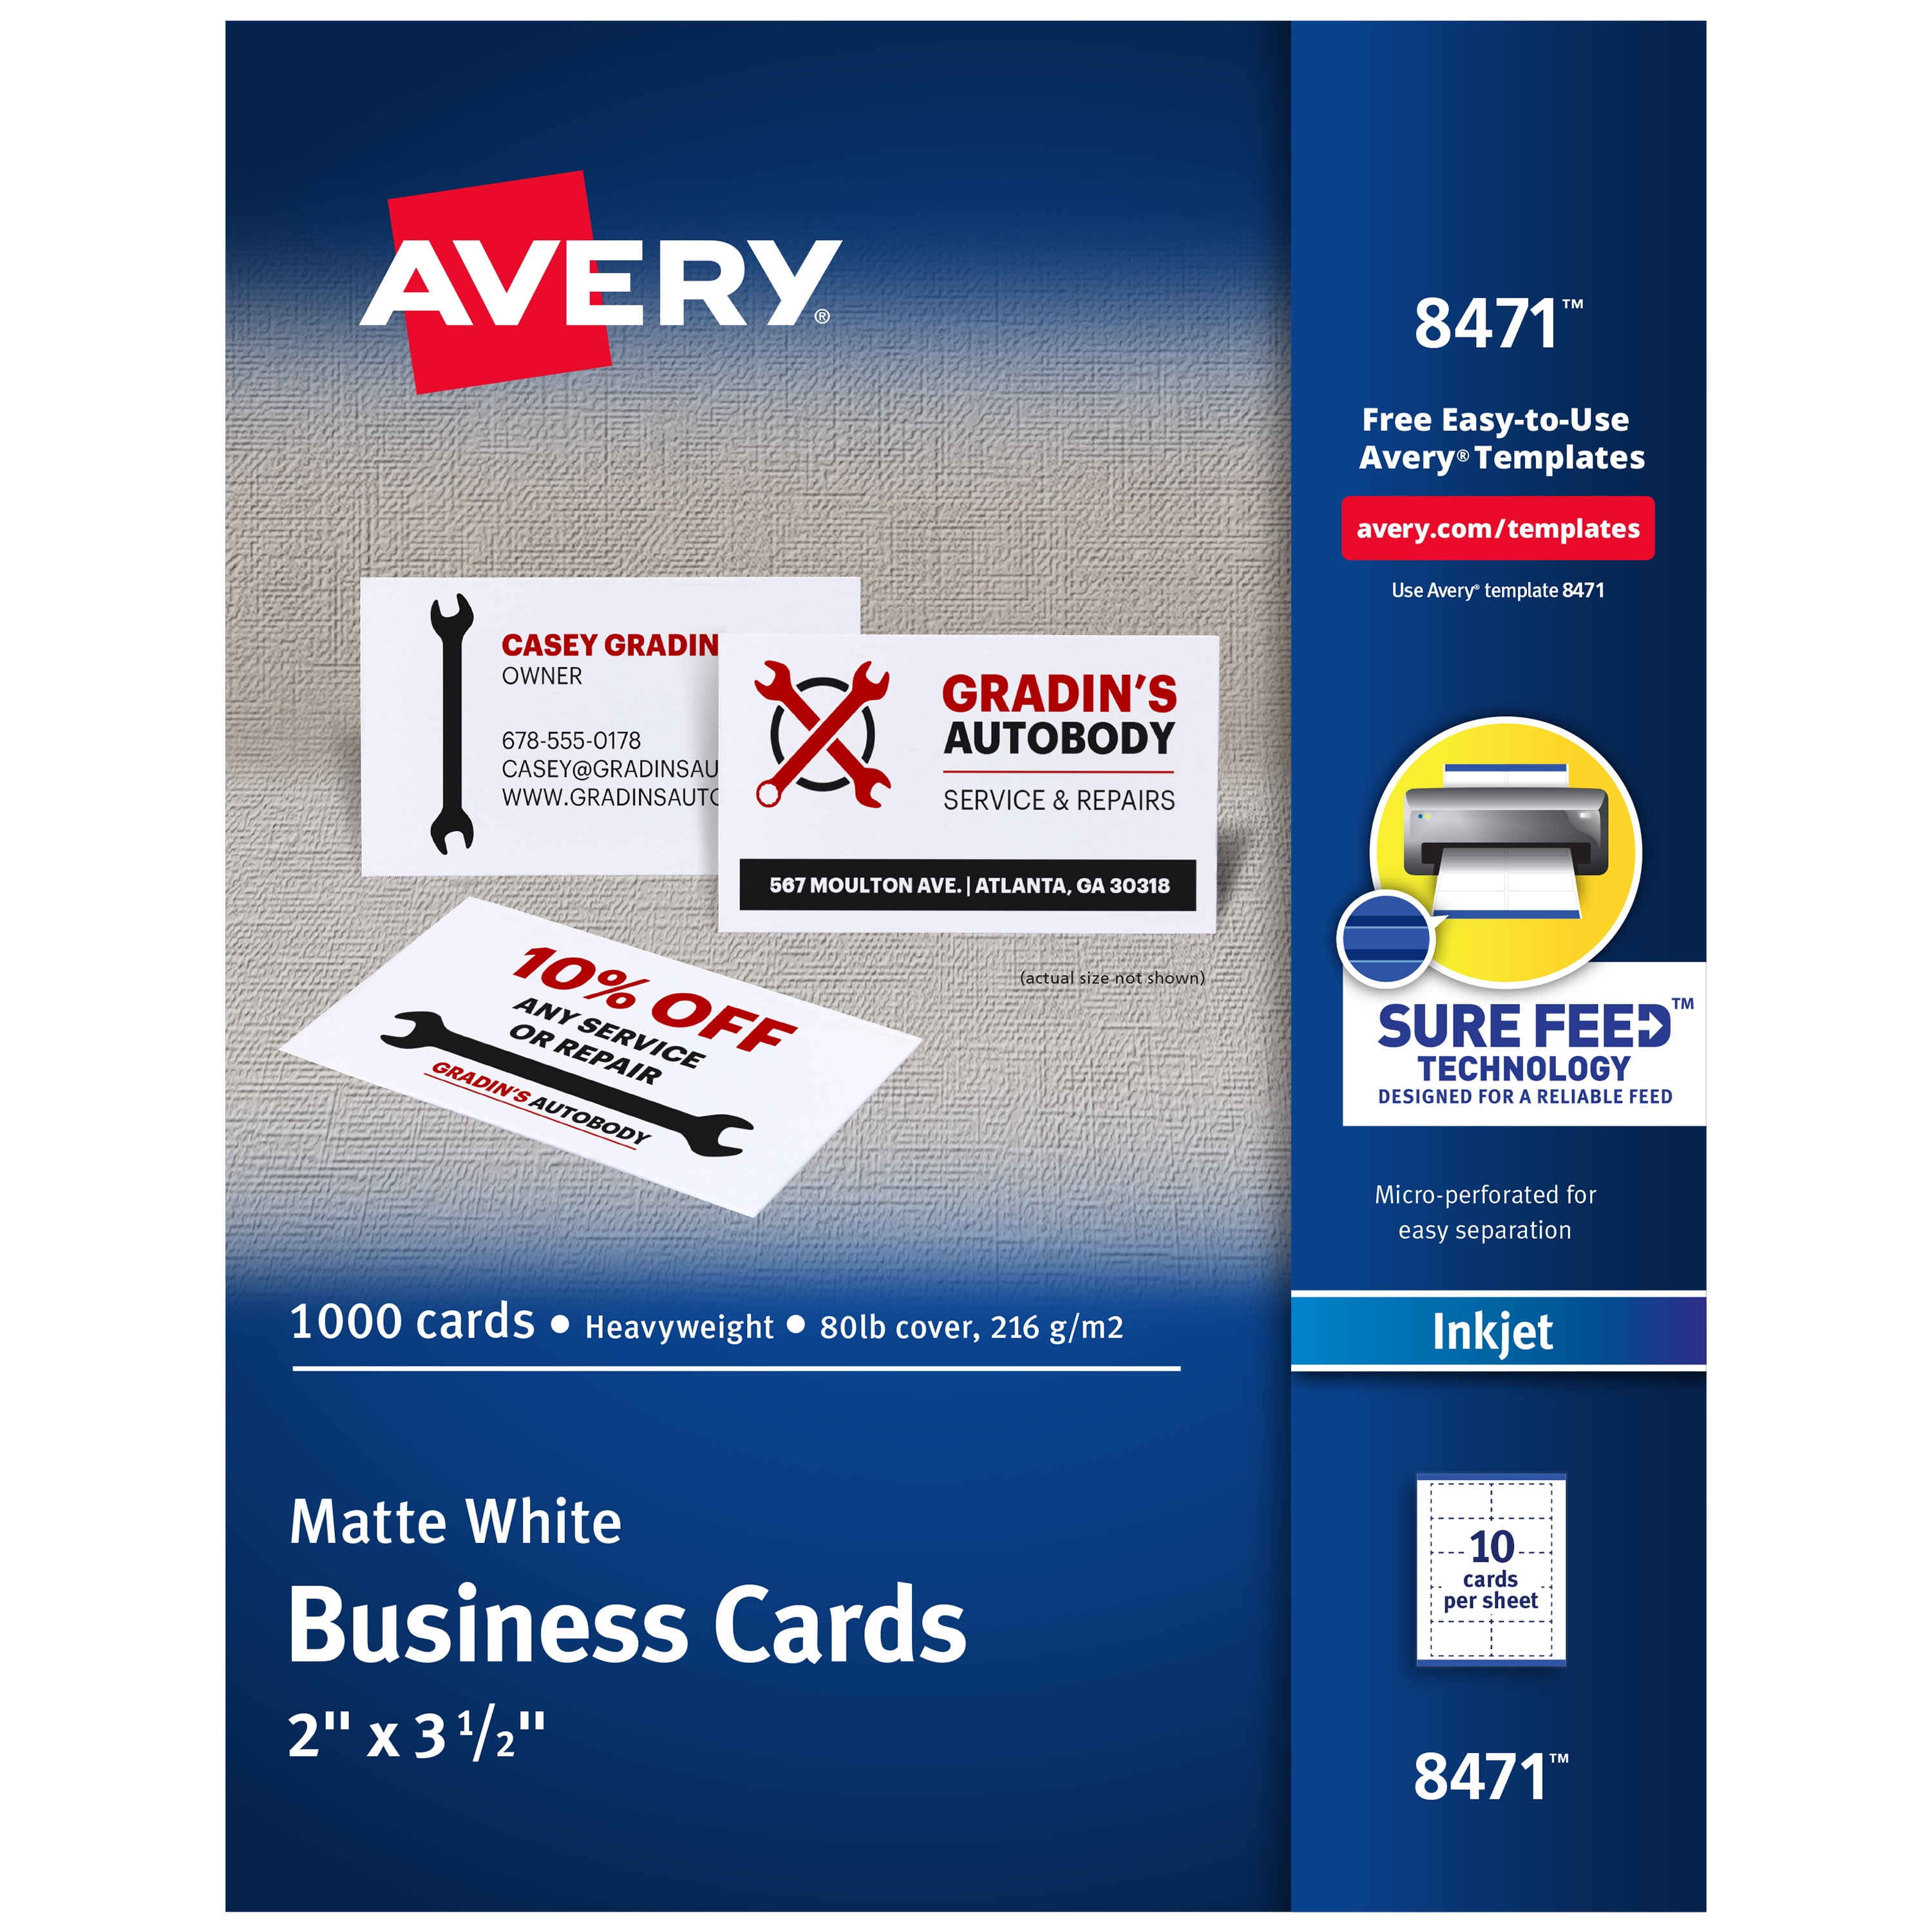 Avery 28371 White Ink Jet Printer Business Cards 100 Count for sale online 